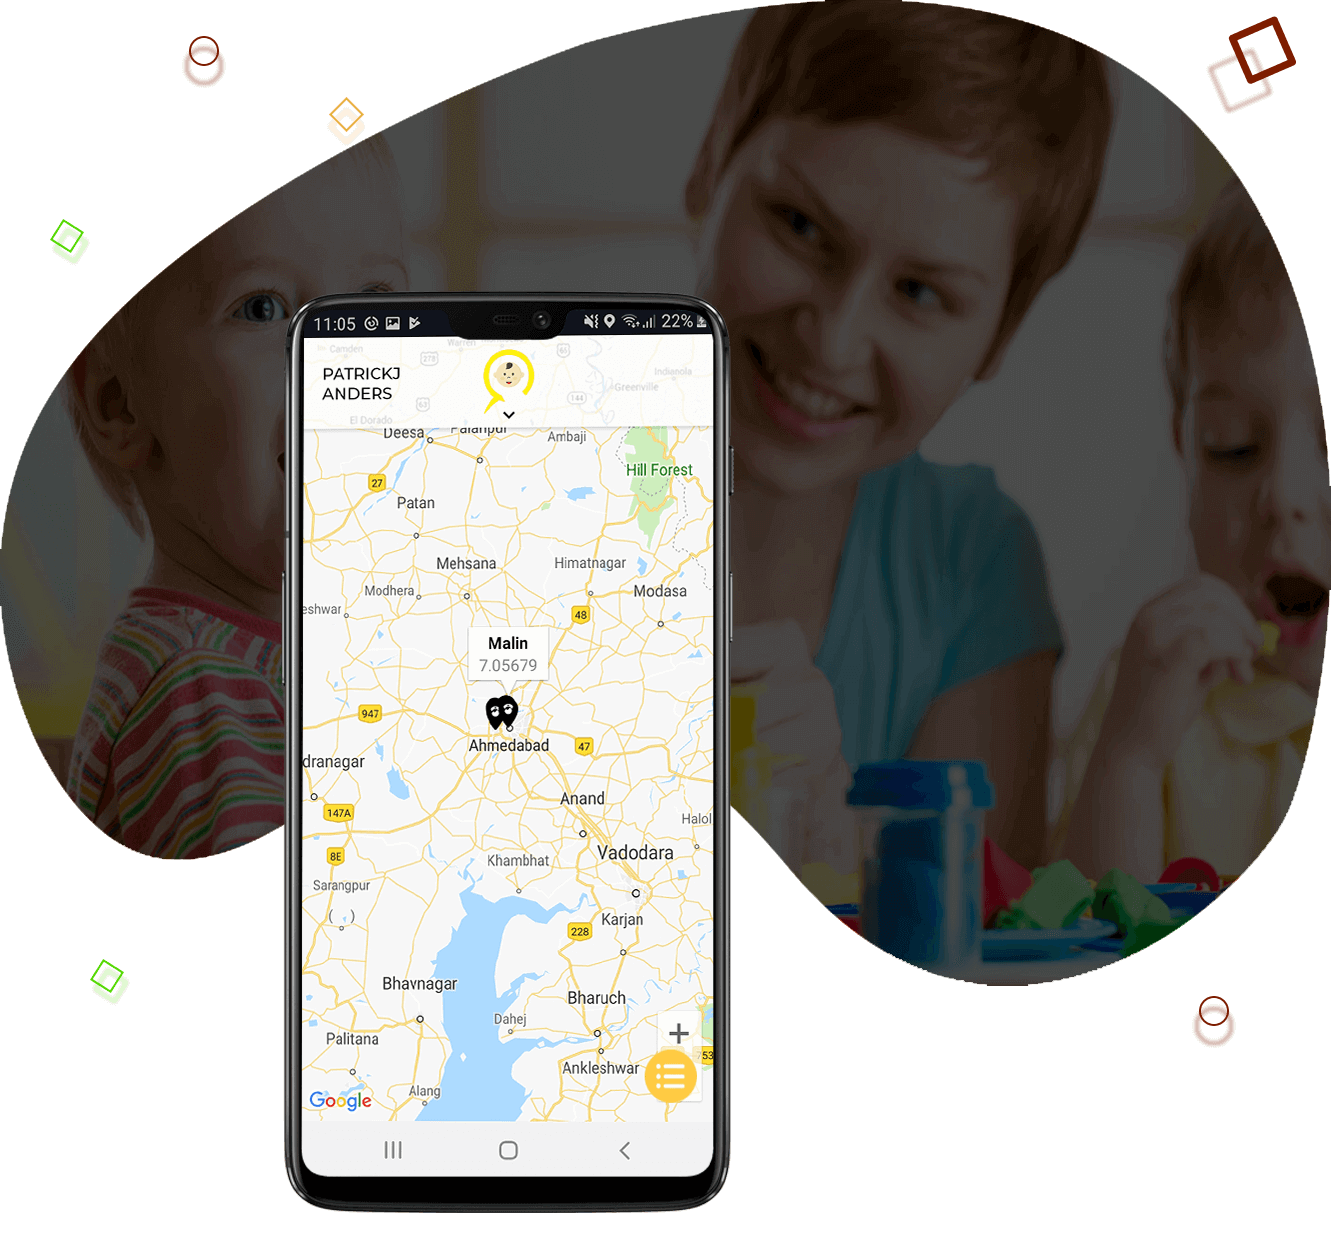 Features for Babysitters in the Babysitter App